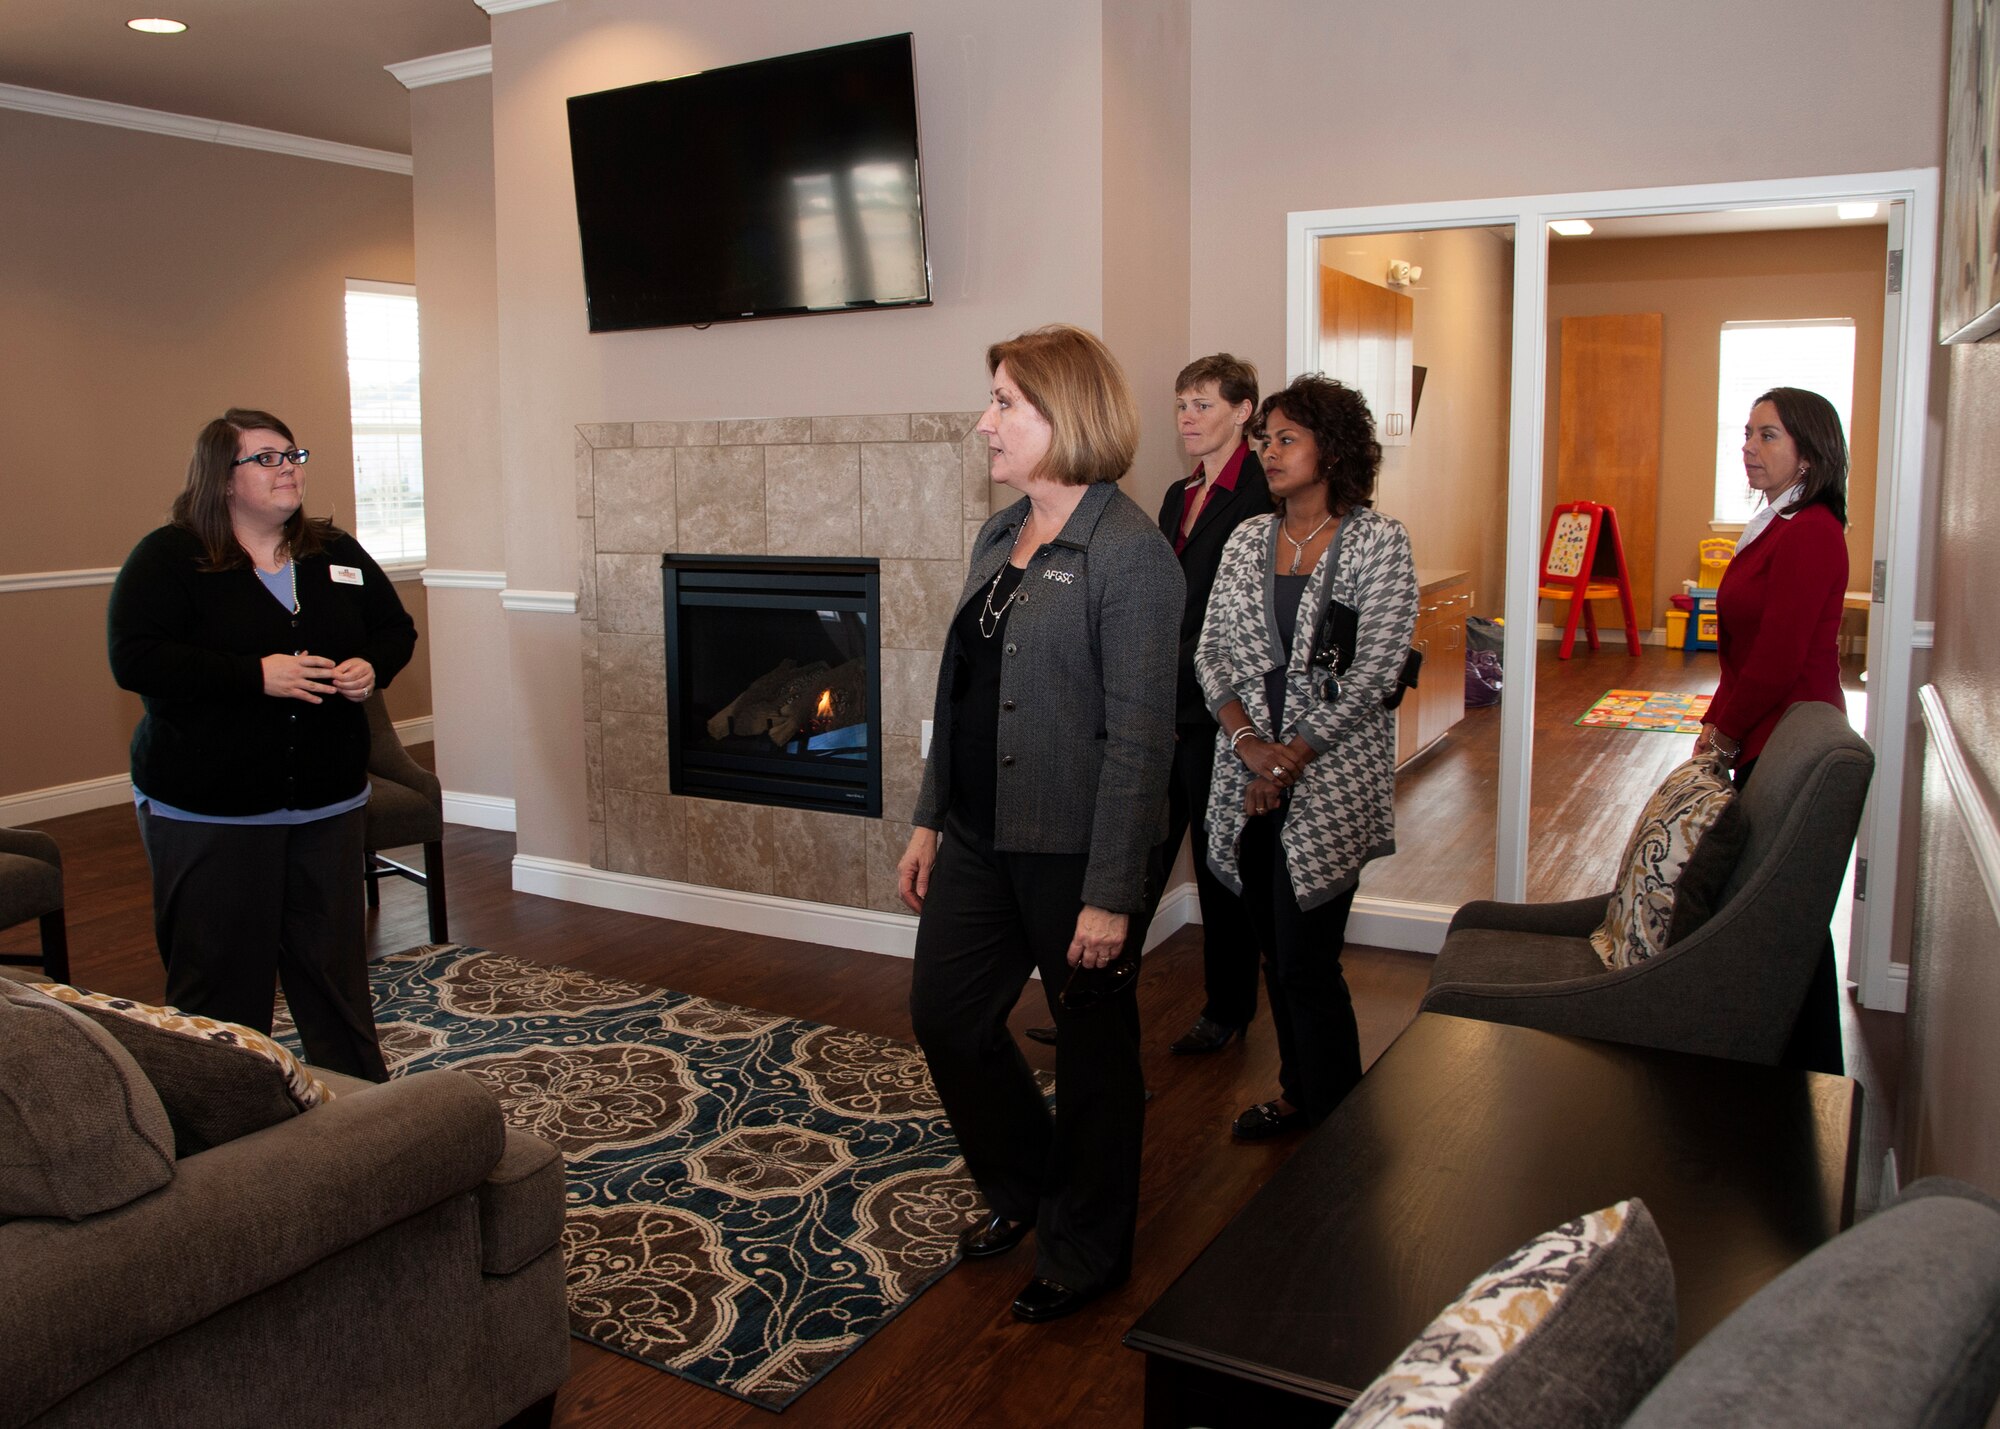 Mrs. Nancy Wilson, center, spouse of Lt. Gen. Stephen Wilson, commander of Air Force Global Strike Command, visits the Eastside Family Housing Community Center during a tour of Barksdale Air Force Base, La., Dec. 16, 2014. Wilson was joined by base leadership spouses to get a better understanding of life on base. (U.S. Air Force photo/Senior Airman Joseph A. Pagán Jr.) 